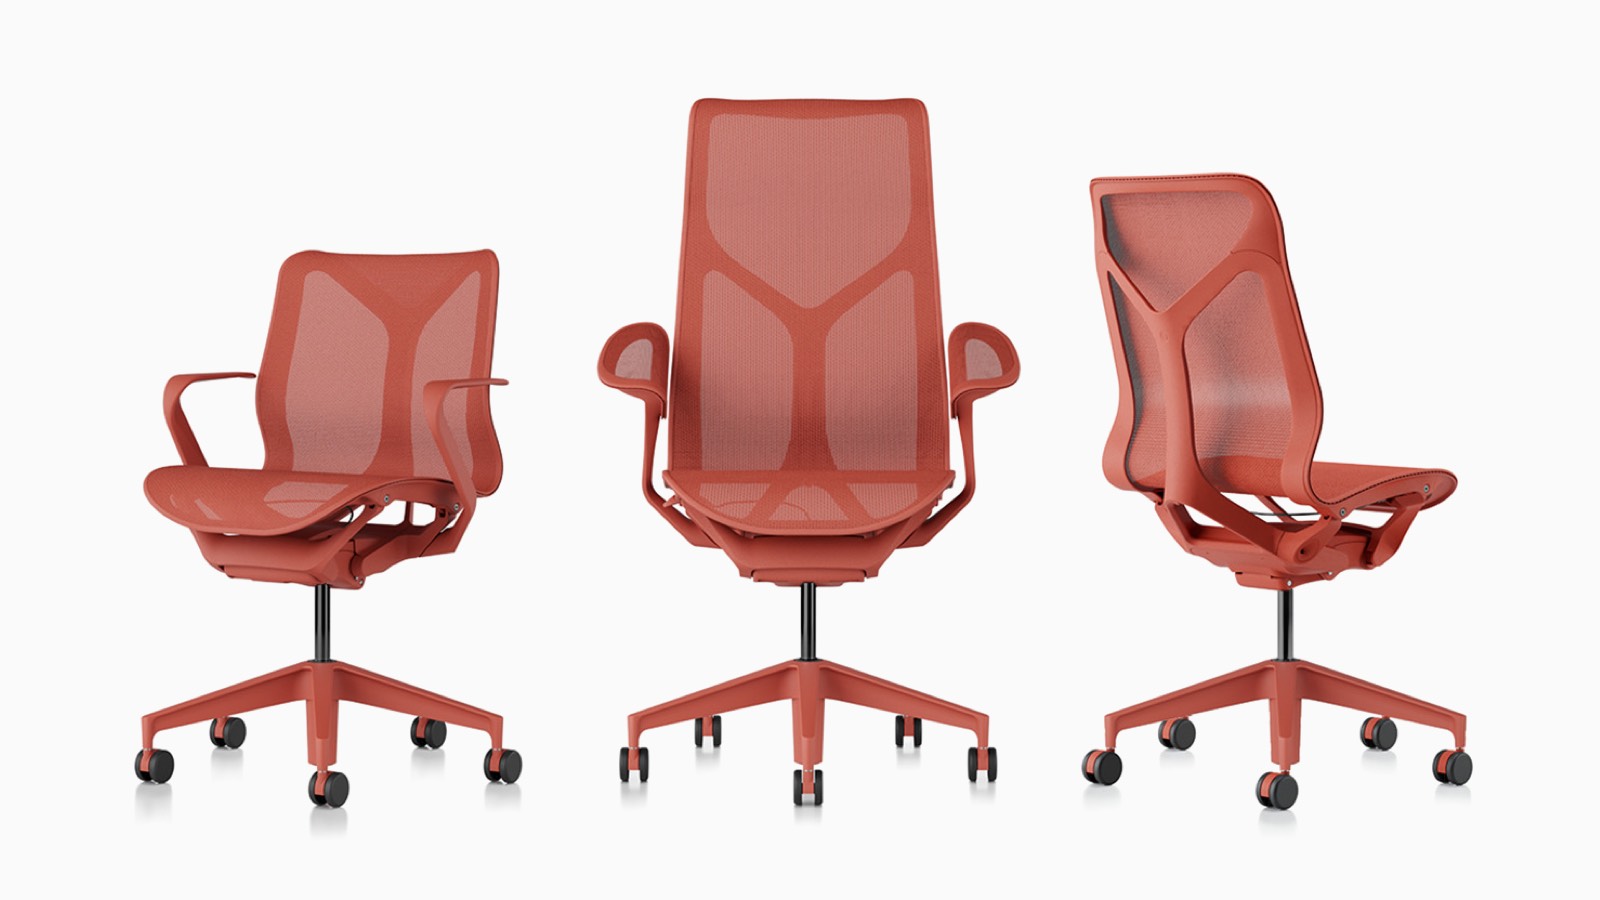 Low-back, high-back, and mid-back Cosm ergonomic desk chairs with suspension materials, bases, and frames in Canyon red.